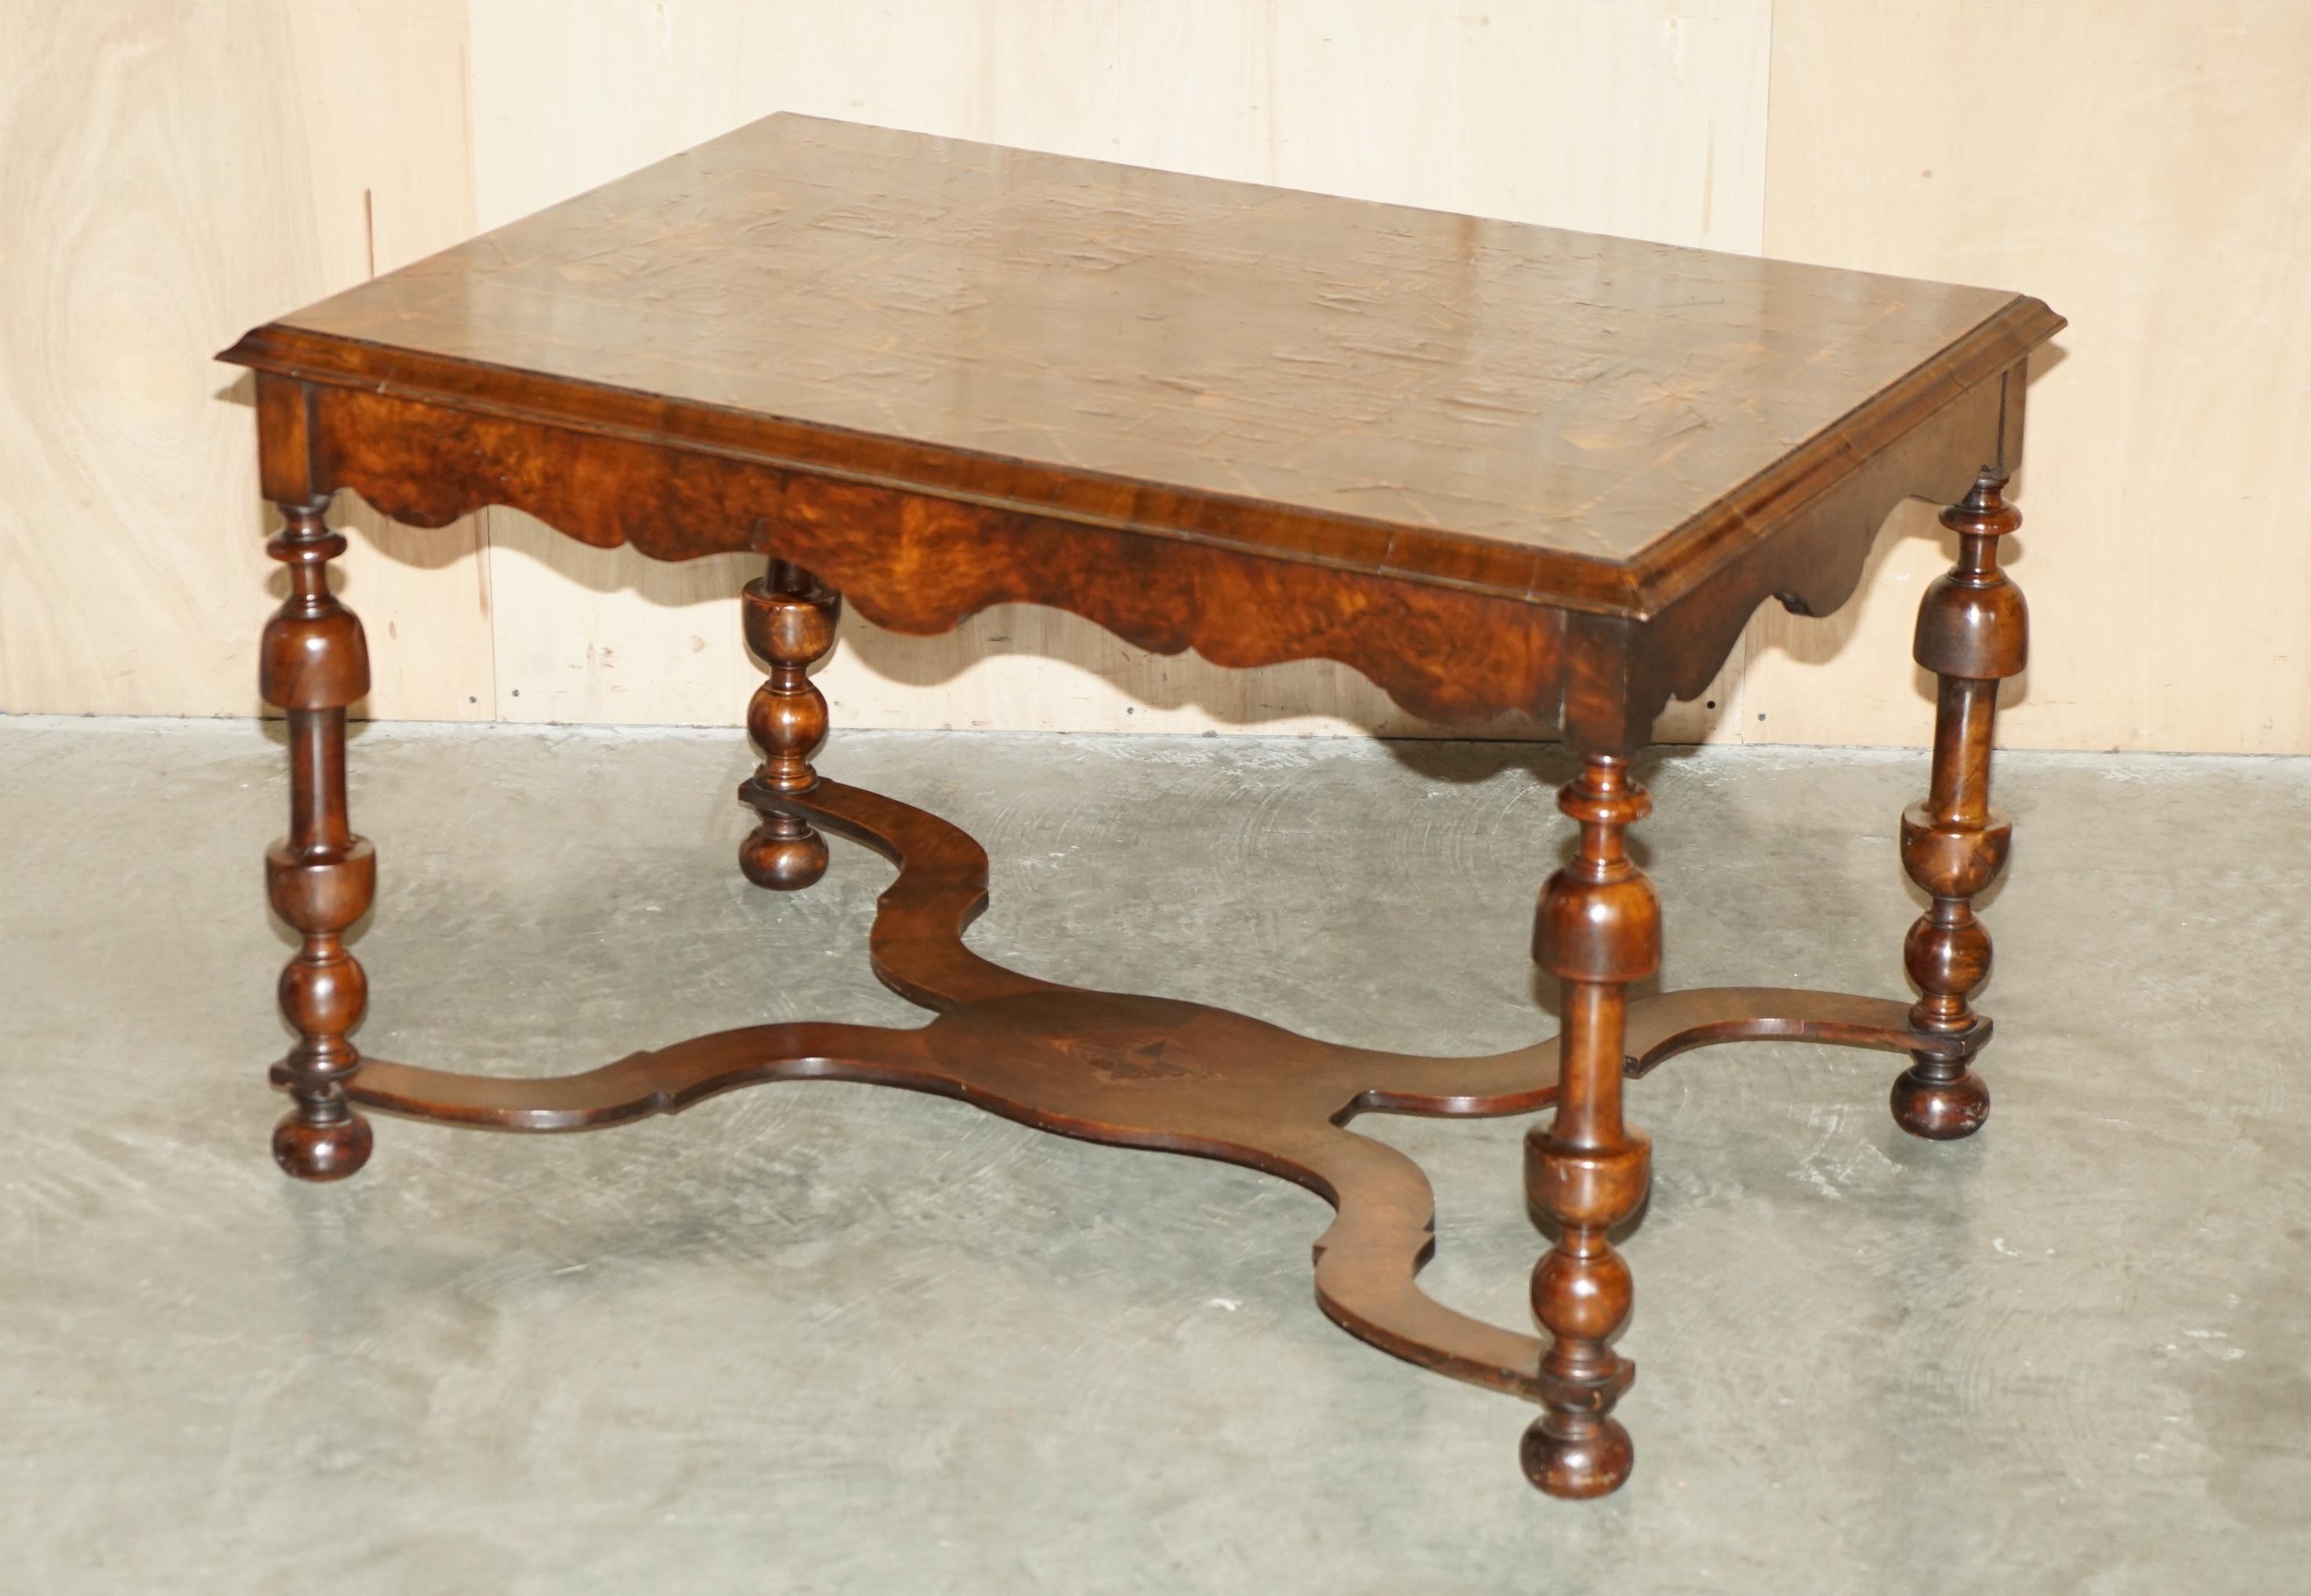 Royal House Antiques

Royal House Antiques is delighted to offer for sale this exquisite, hand made in England, William & Mary circa 1700 Oyster and Laburnum wood and Burr Walnut centre table on a oak frame which has been fully restored and French